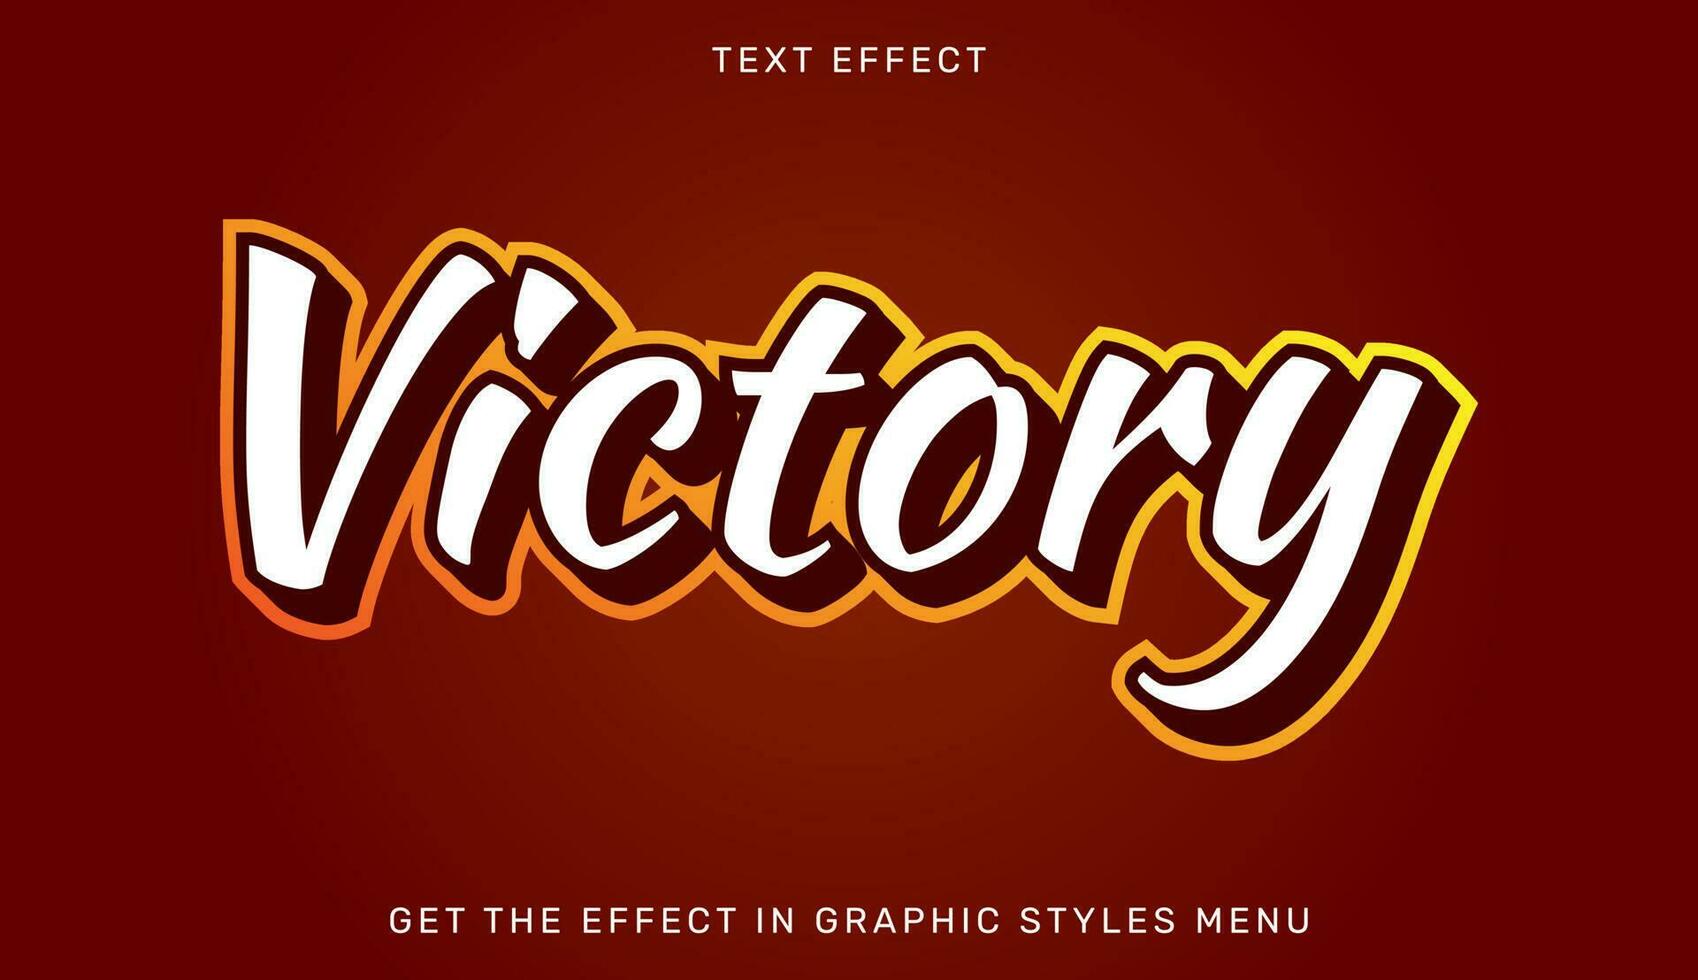 Victory editable text effect in 3d style vector